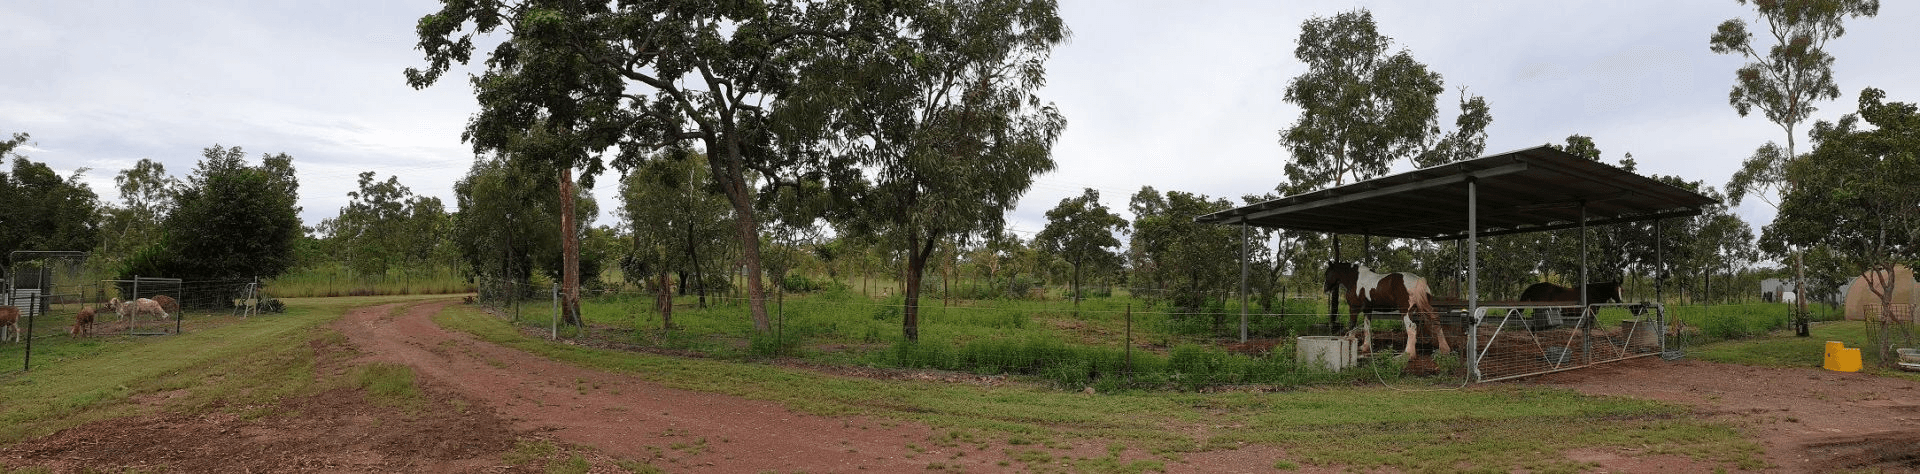 584 Chibnall Rd, FLY CREEK, NT 0822